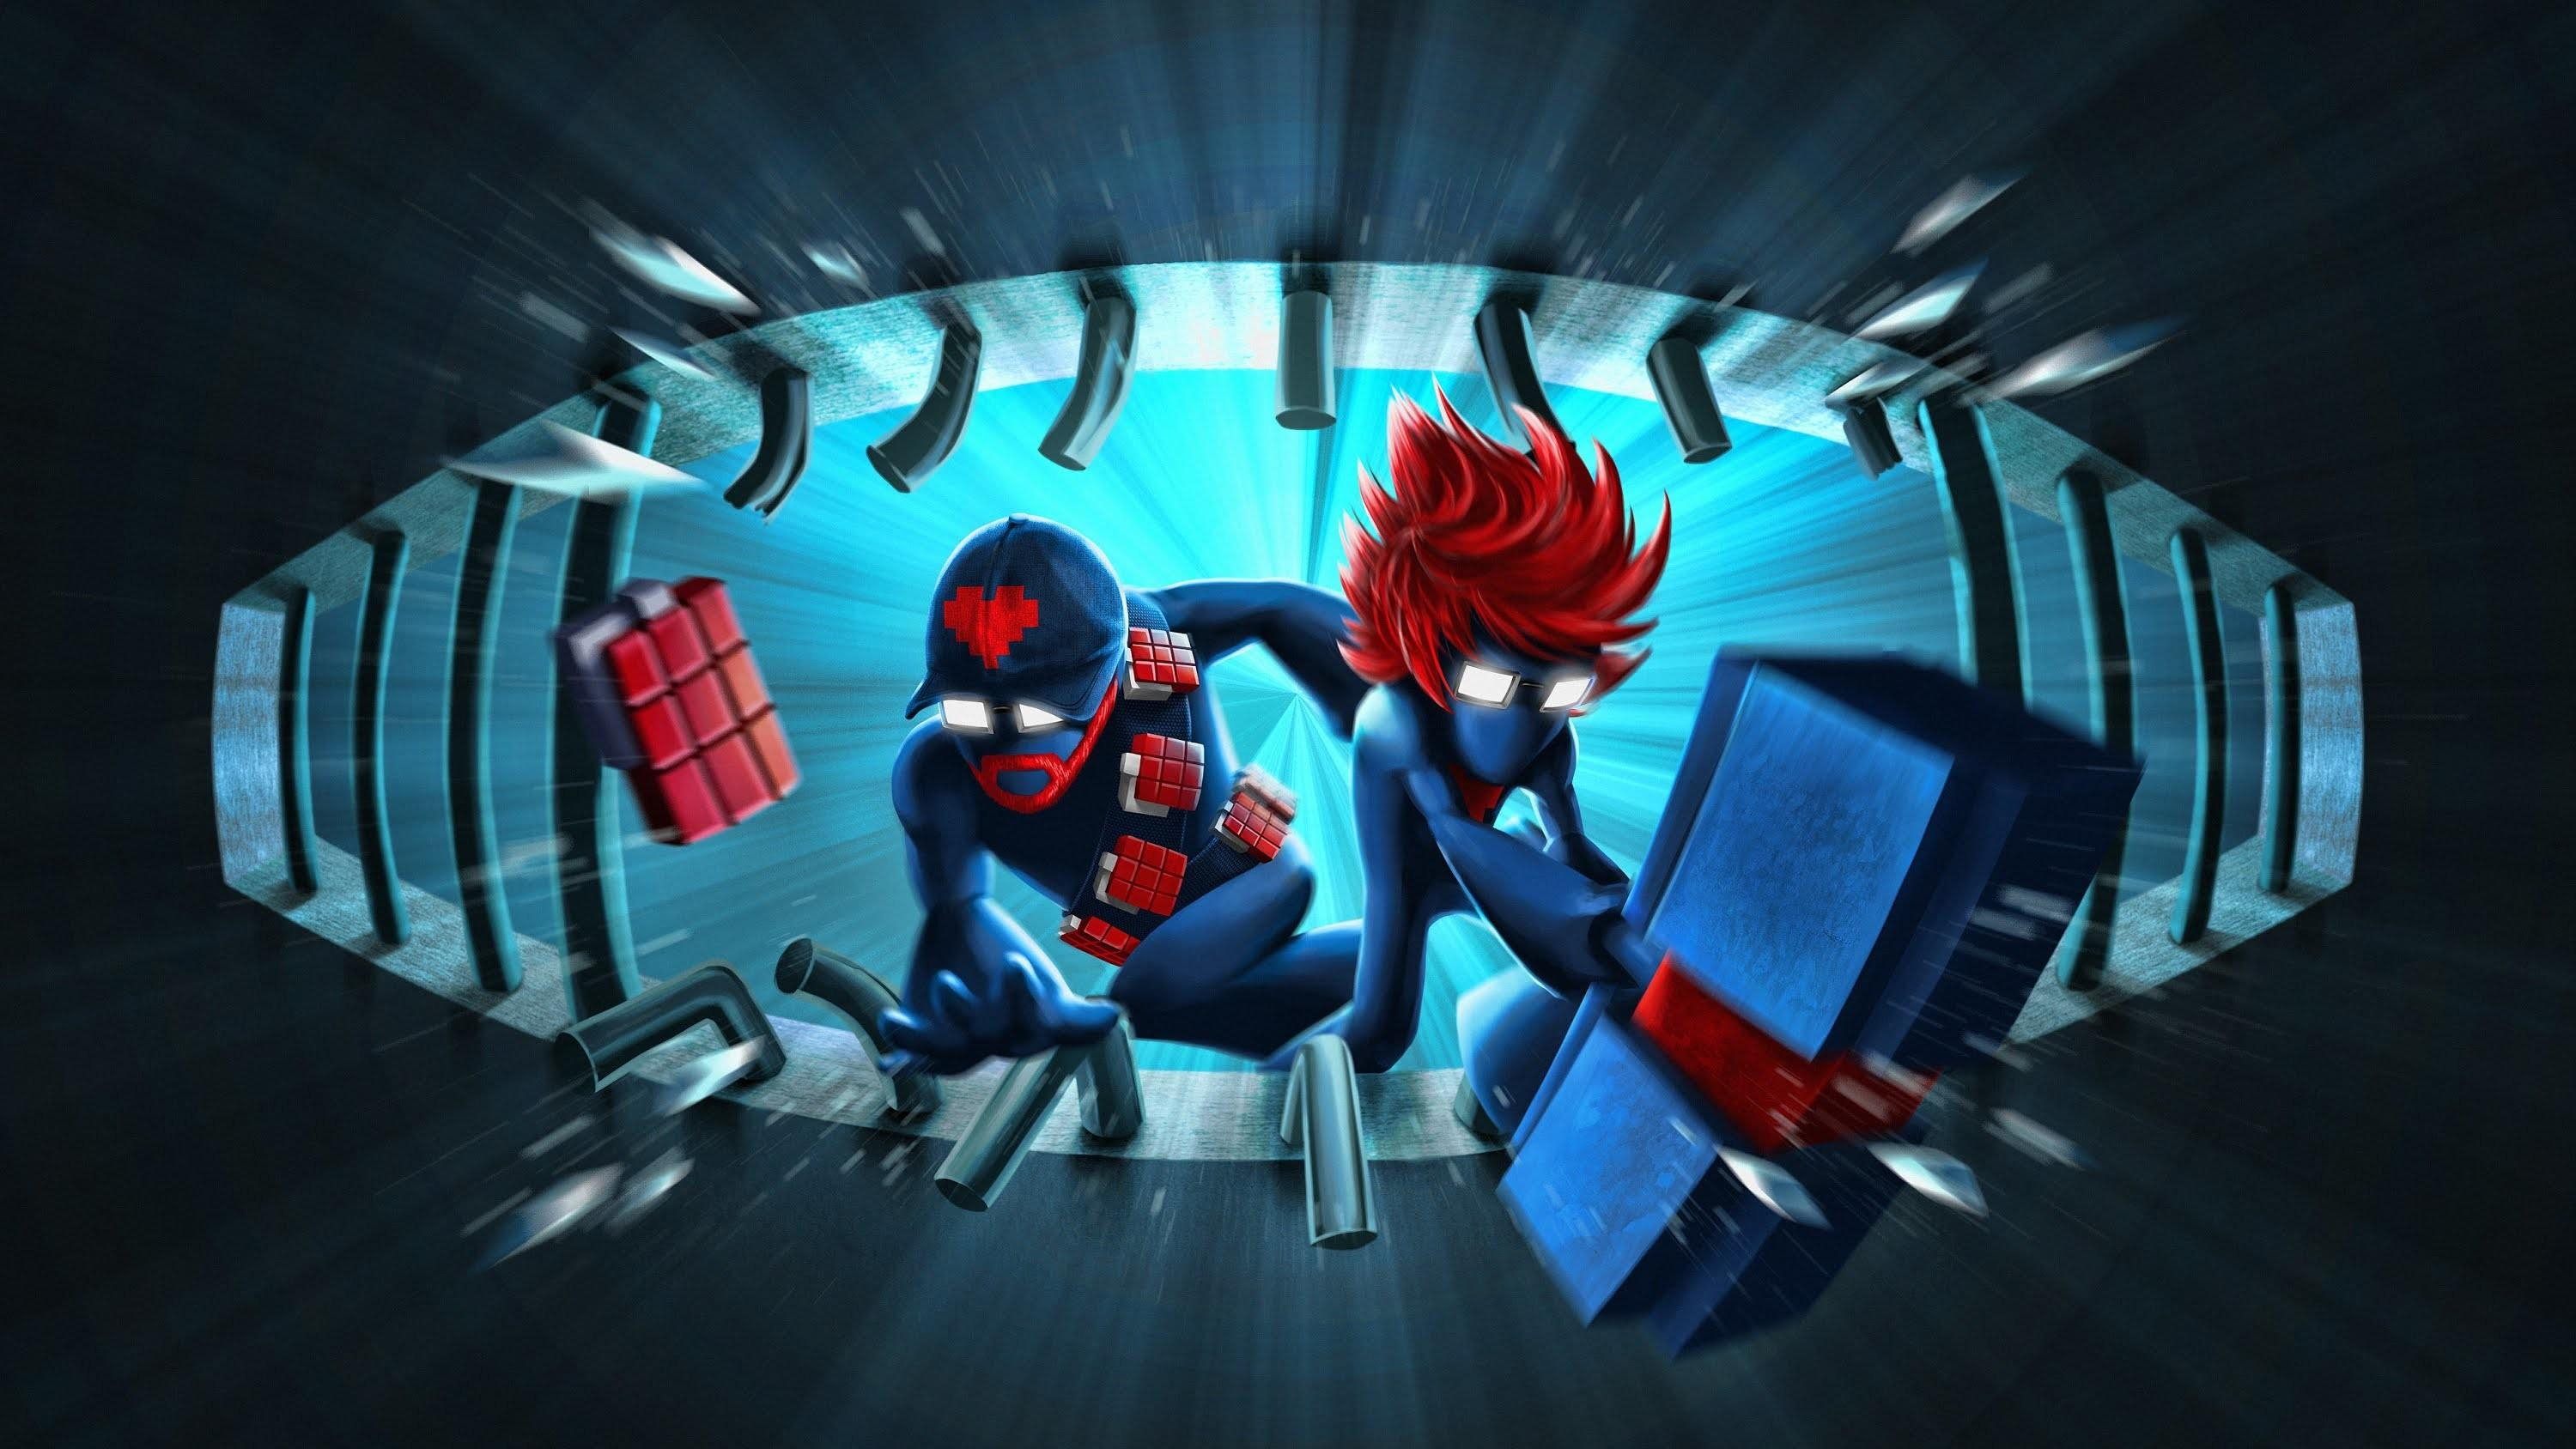 3000x1688 Pegboard Nerds Wallpapers